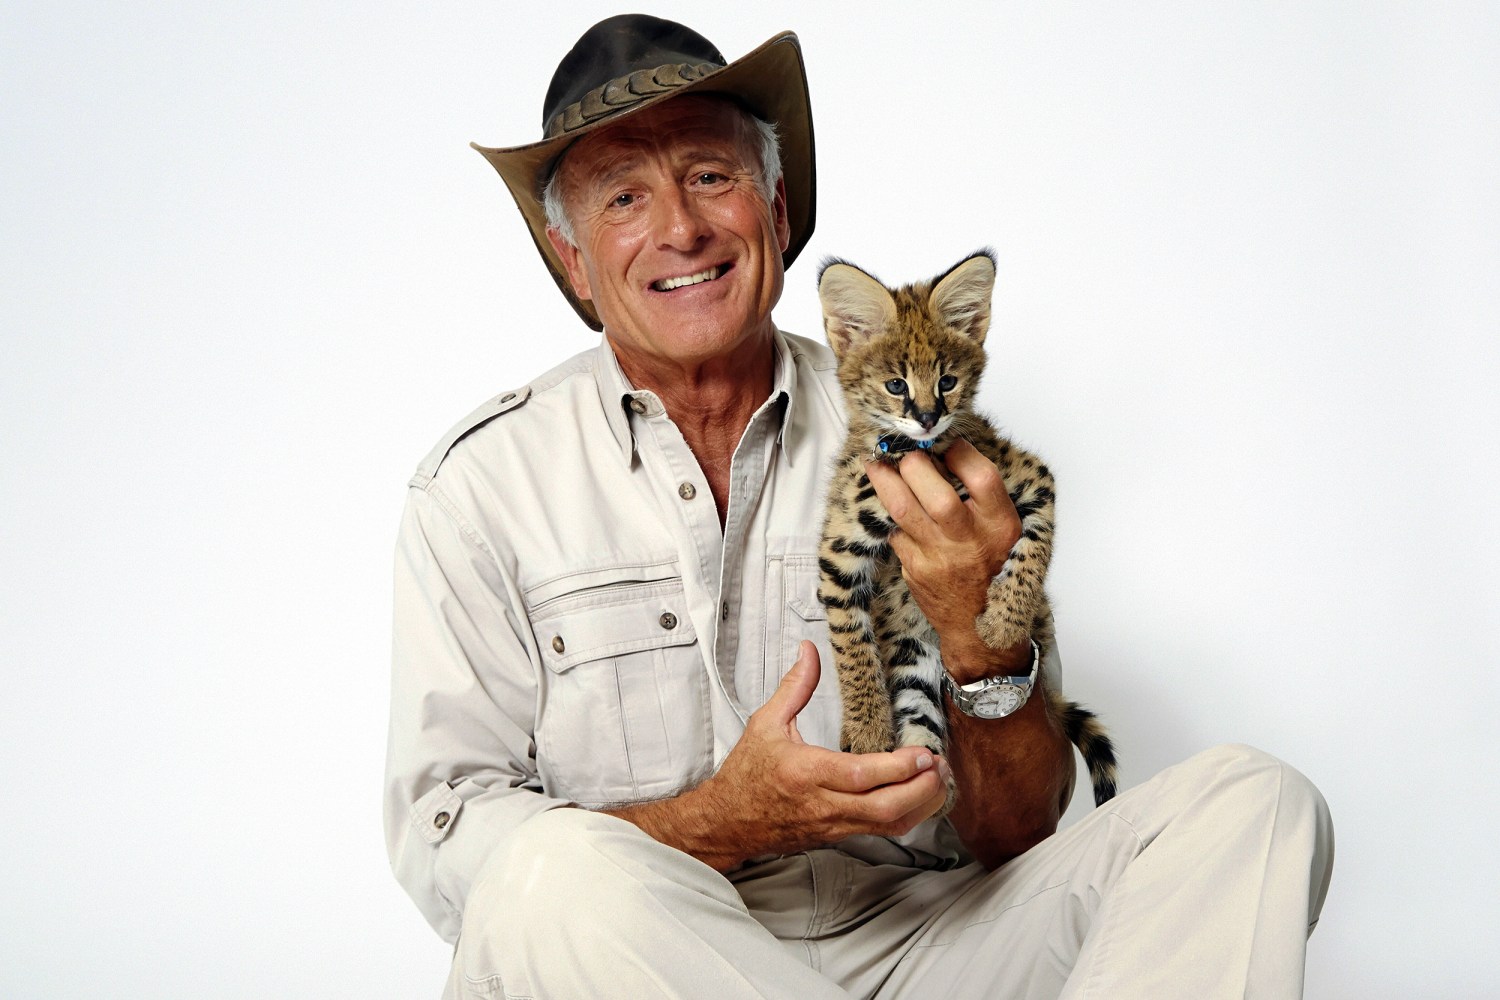 Beloved animal expert Jack Hanna has dementia, steps away from public life